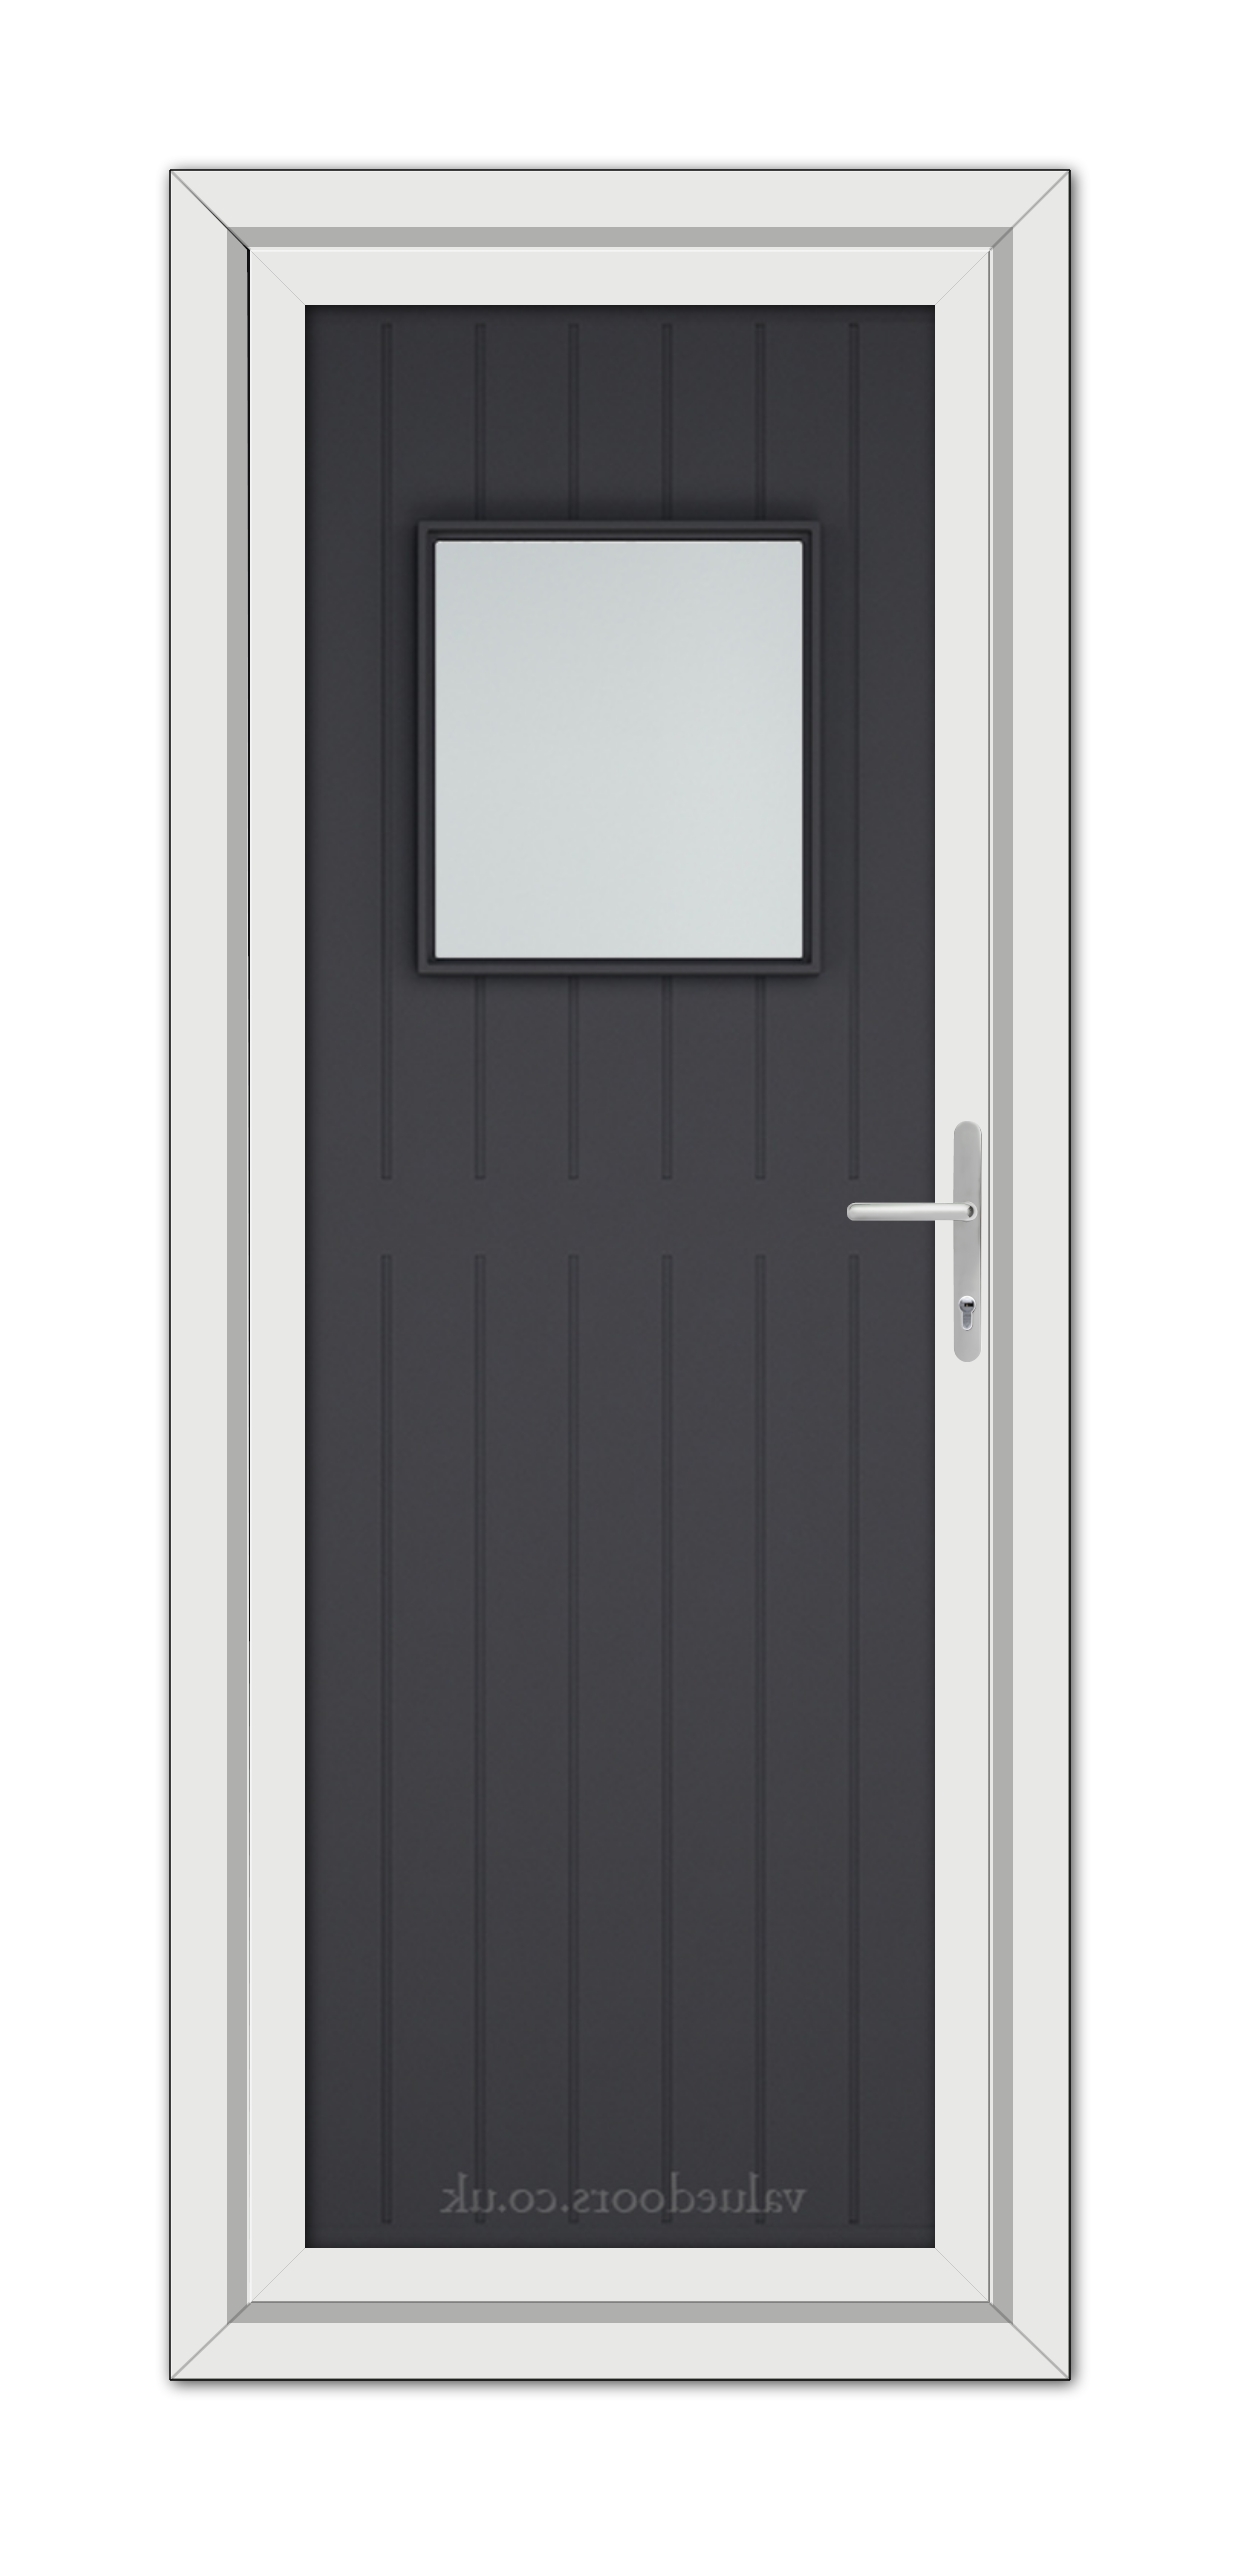 Sentence with Product Name: A modern Grey Chatsworth uPVC Door featuring a small, centered rectangular window, vertical panels, and a silver handle, framed in white.